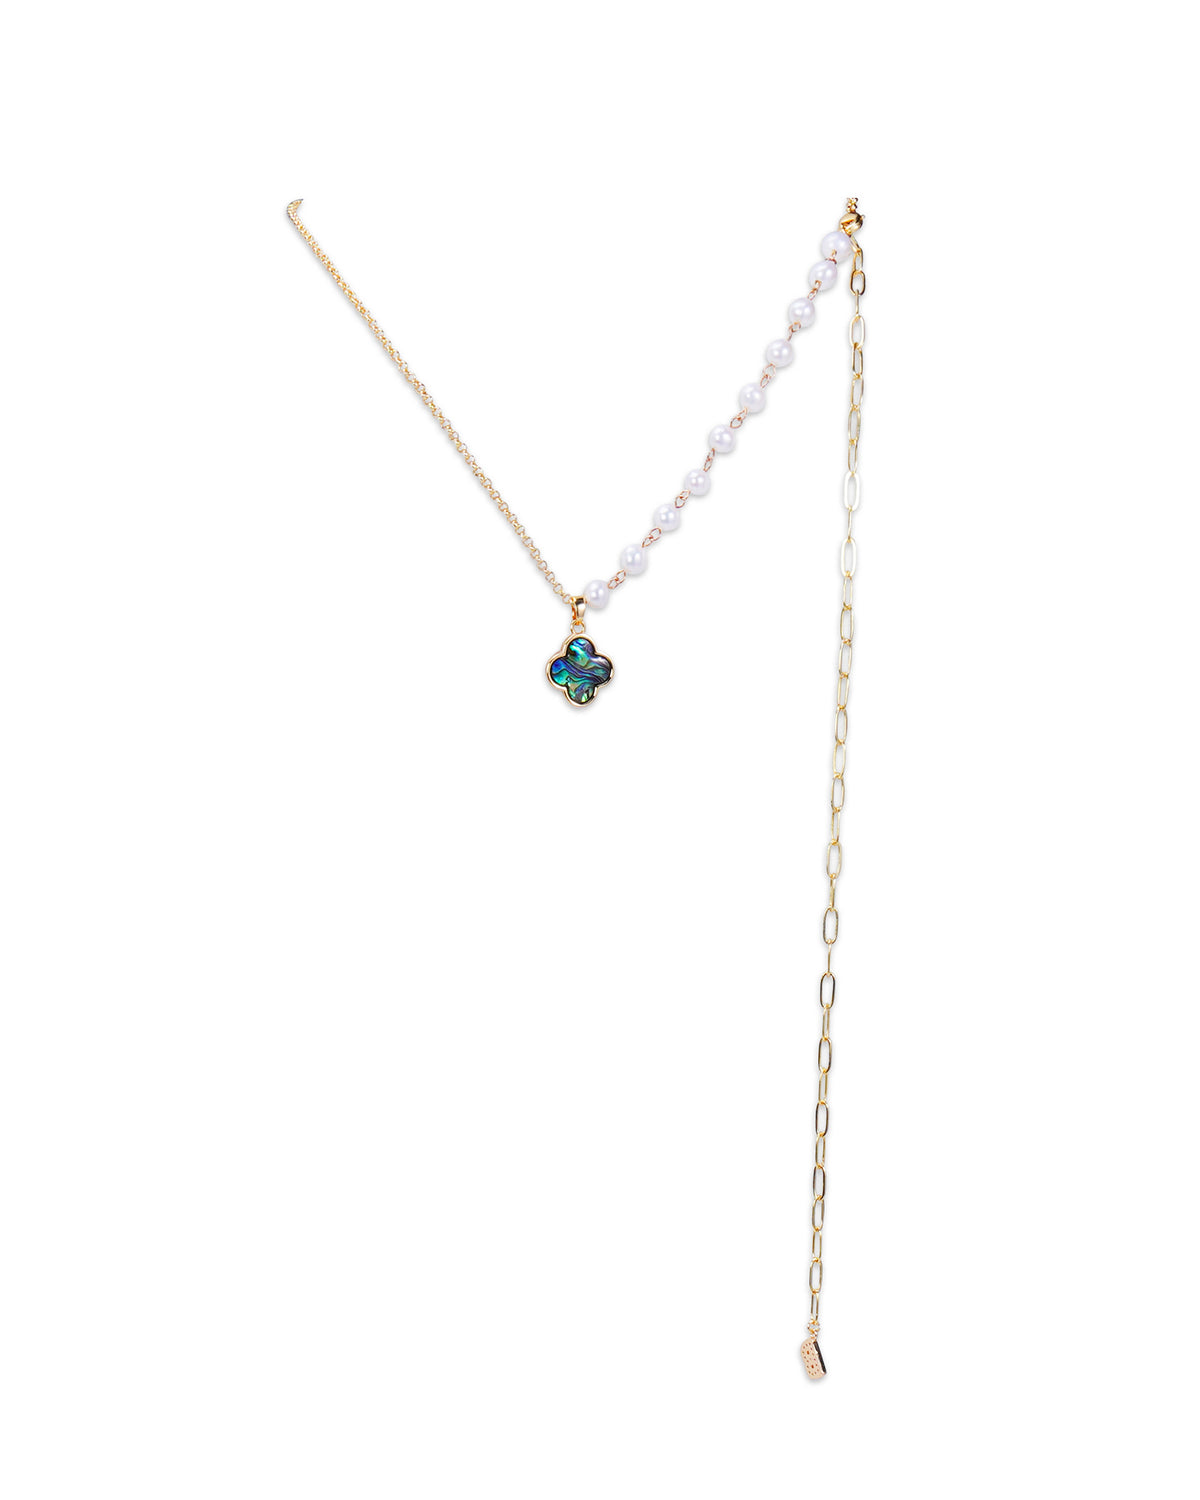 14K Gold Four-leaf Clover Abalone Shell Pendant Chain & Pearl Necklace